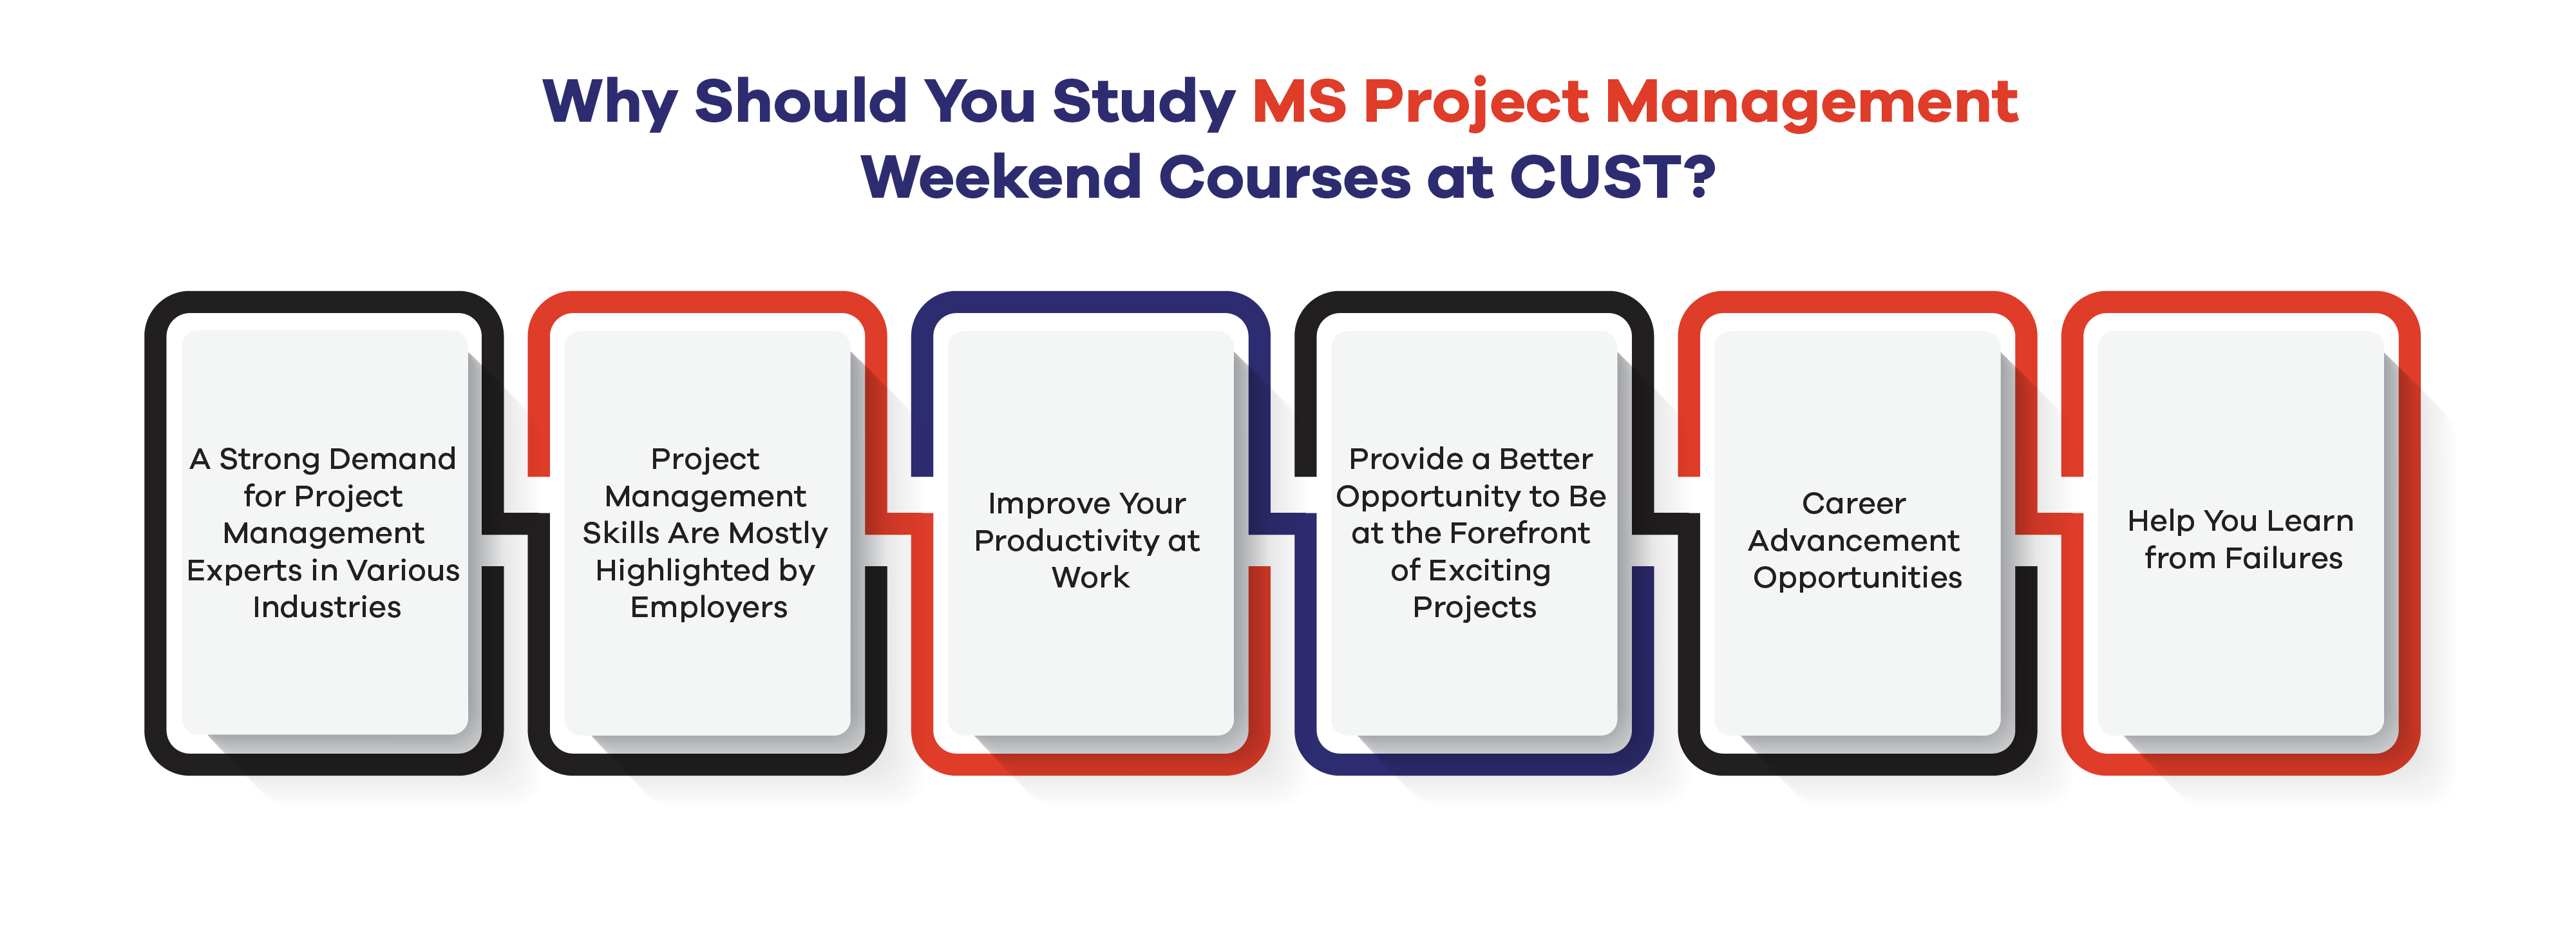 Why Should You Study MS Project Management Weekend Courses at CUST? 